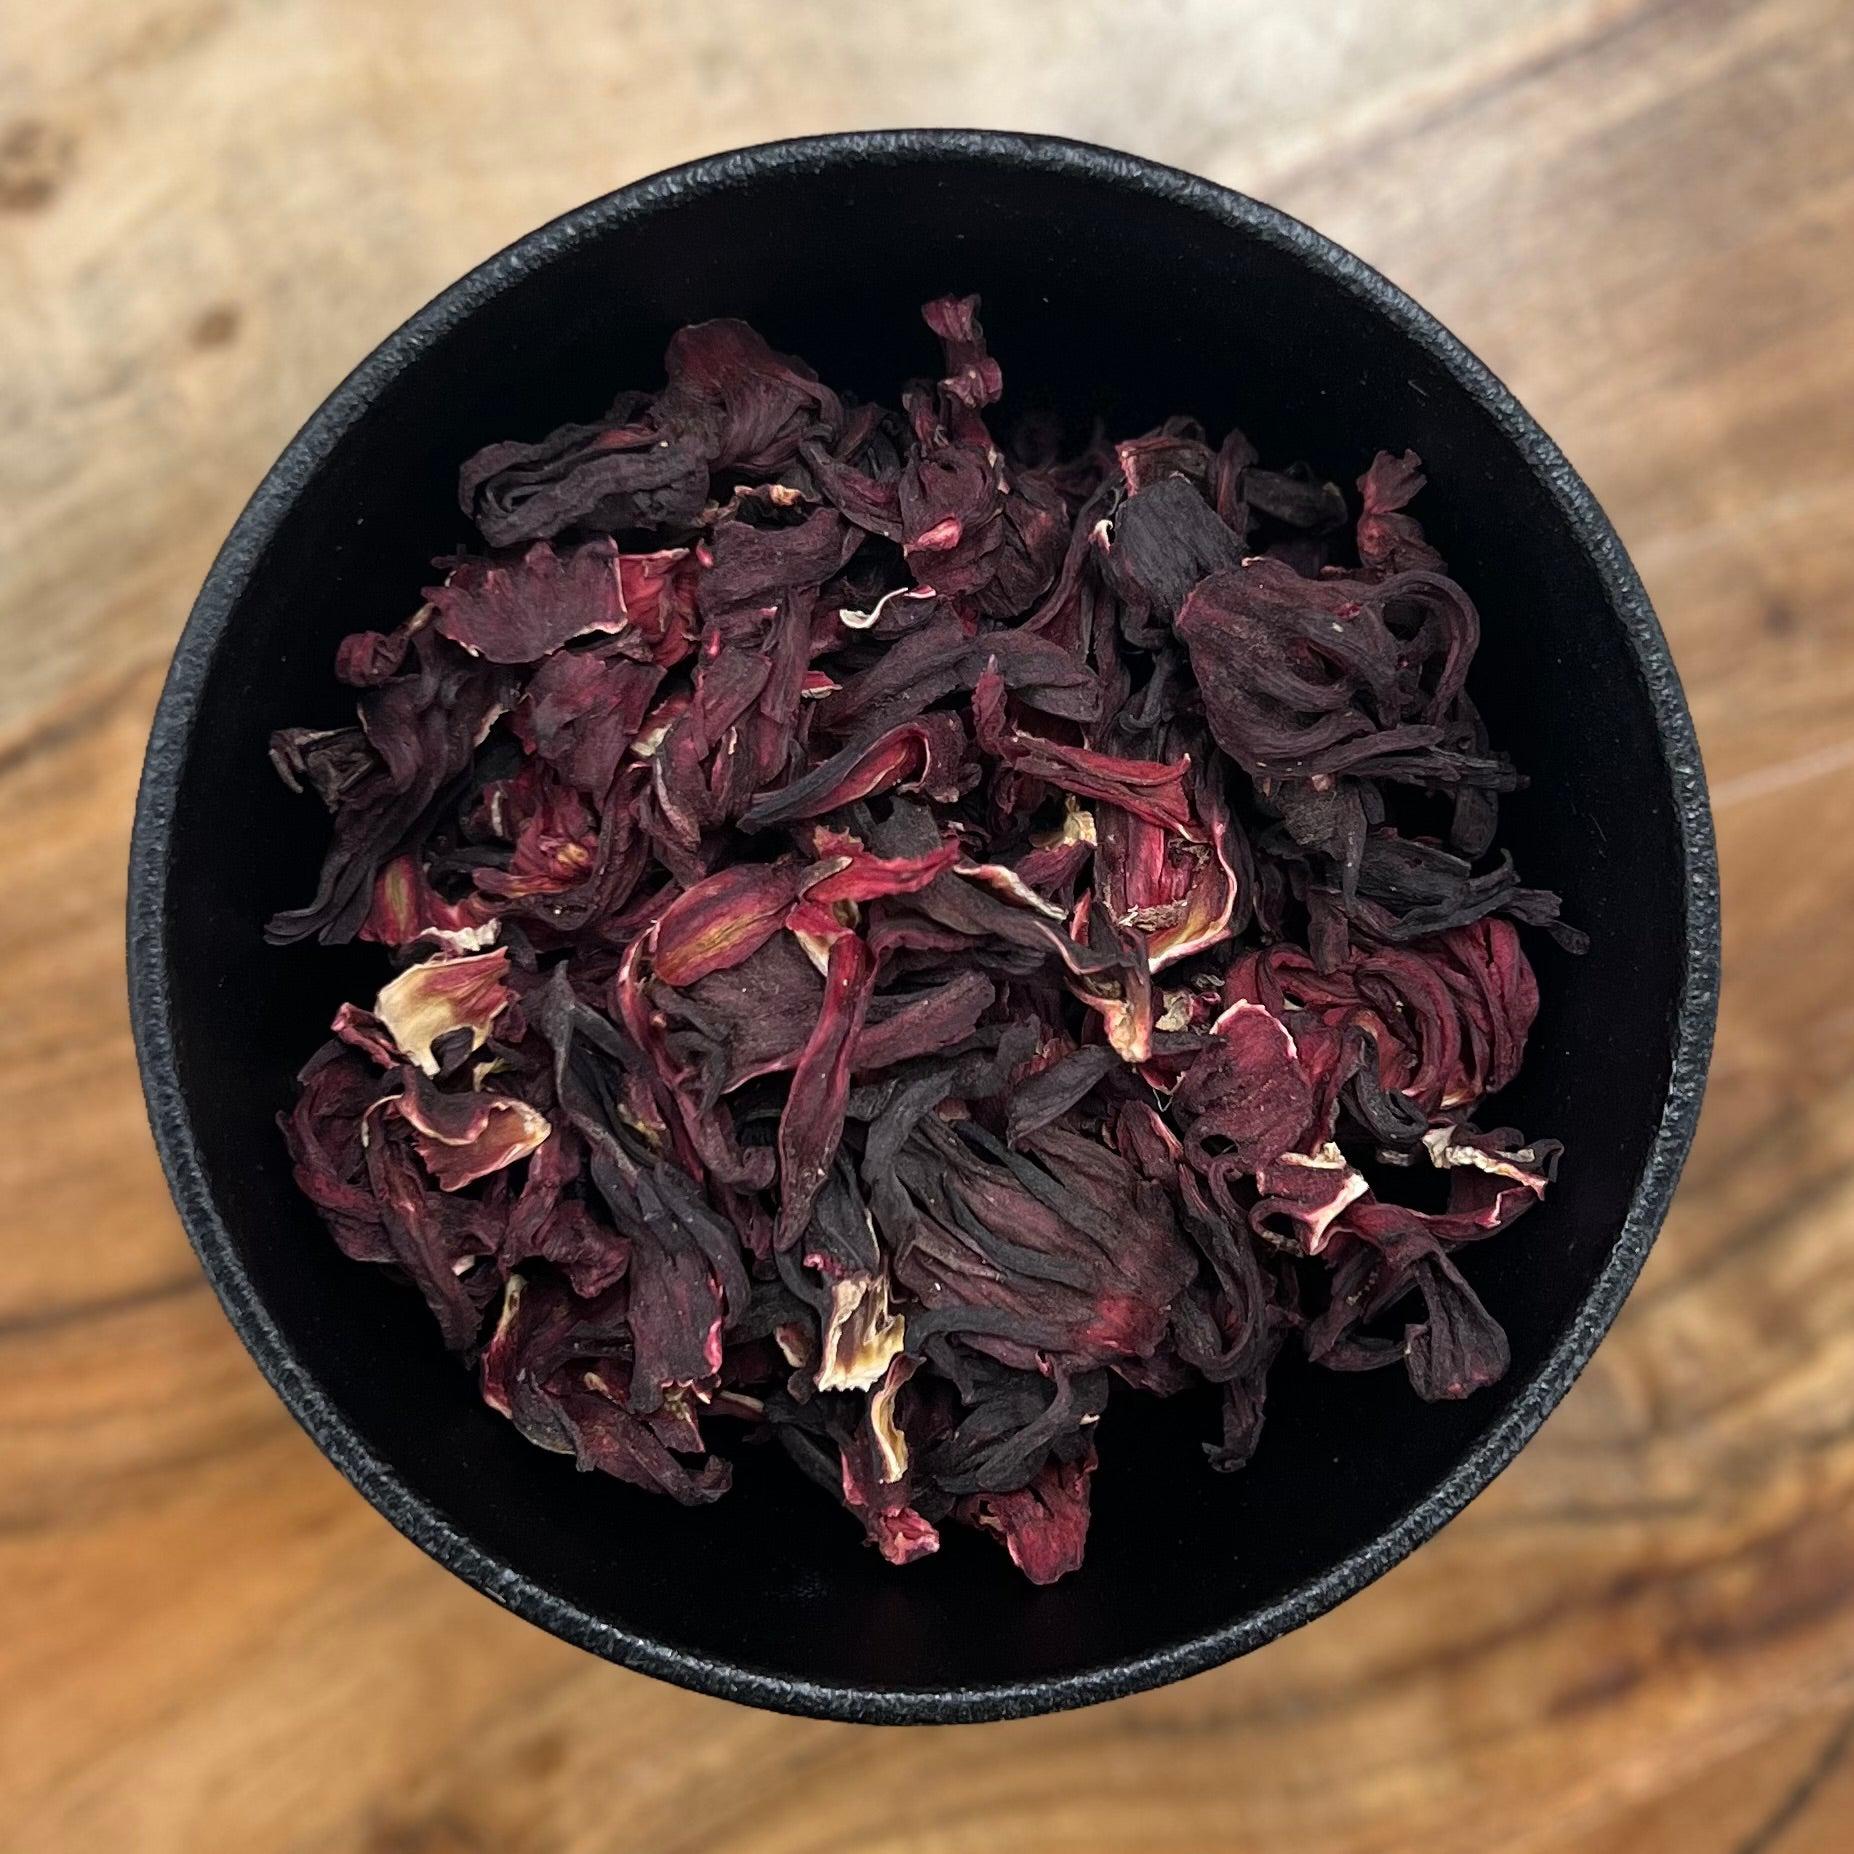 Hibiscus Flowers Whole (1 lb) 1 Pound